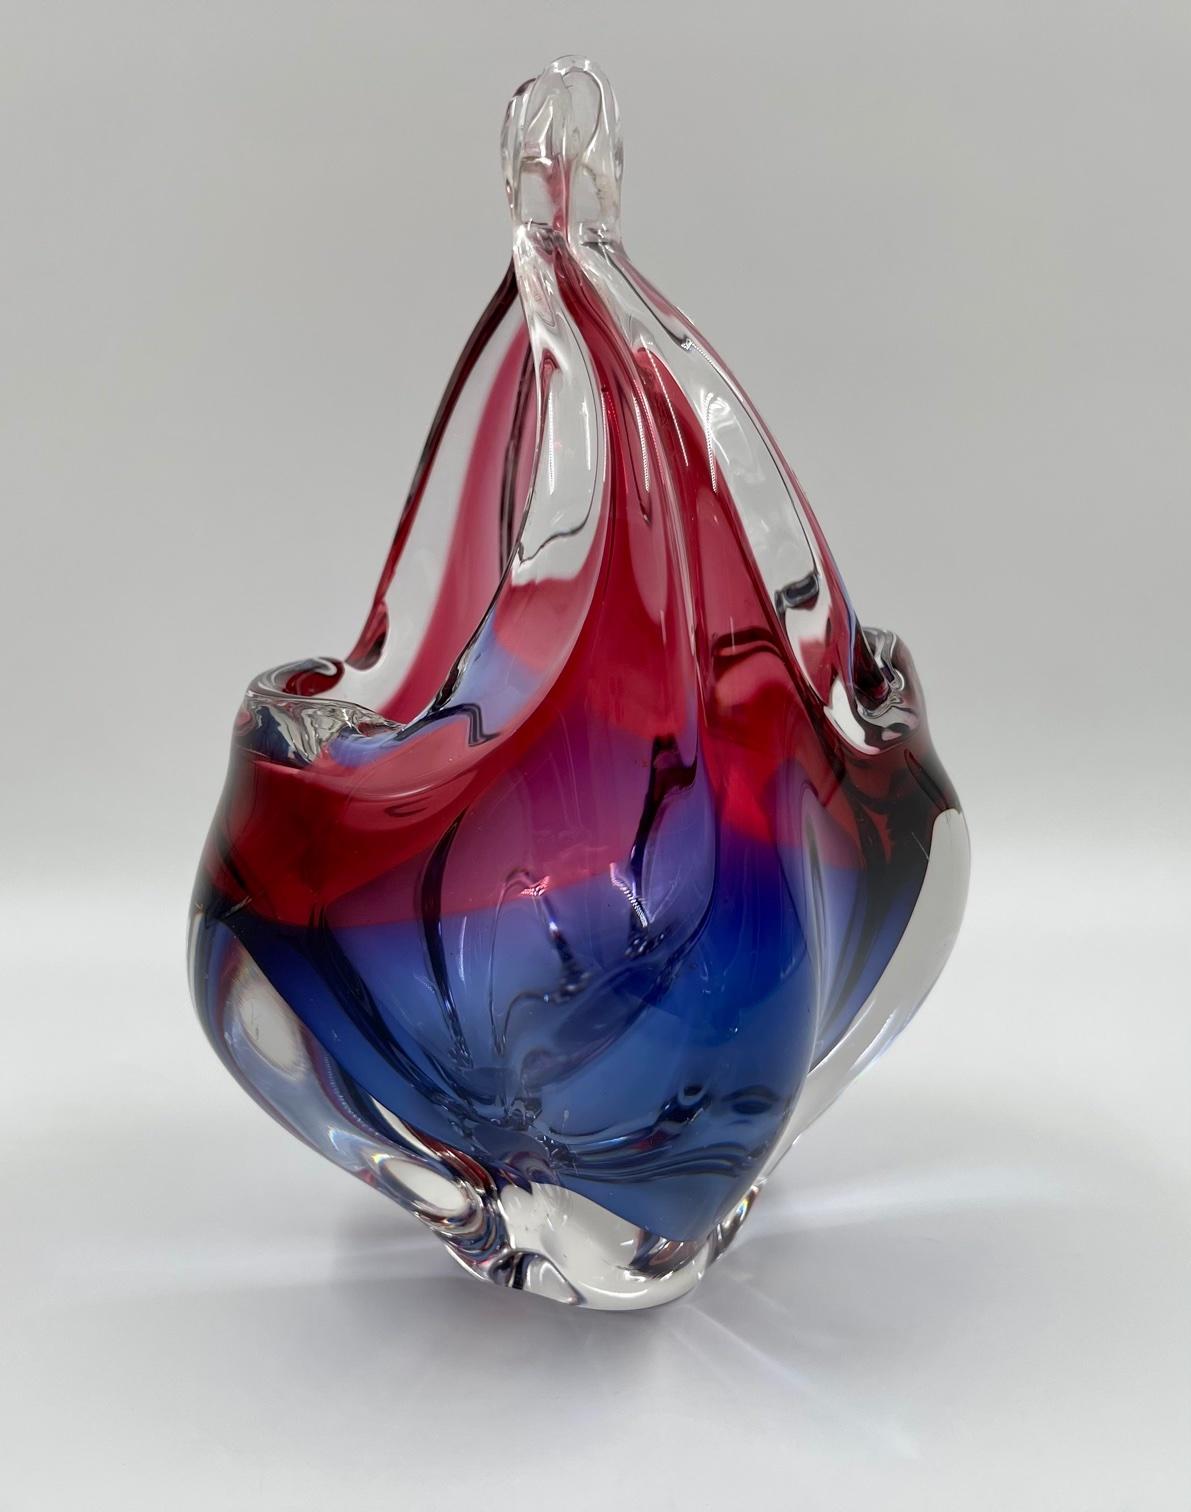 Presenting a Czech Art Glass Candle basket/bowl, crafted by Josef Michael Hospodka for the prestigious Chribska glass firm in 1960. The holder boasts of a compactly designed two-toned glass in blue and red. This Art Glass masterpiece was